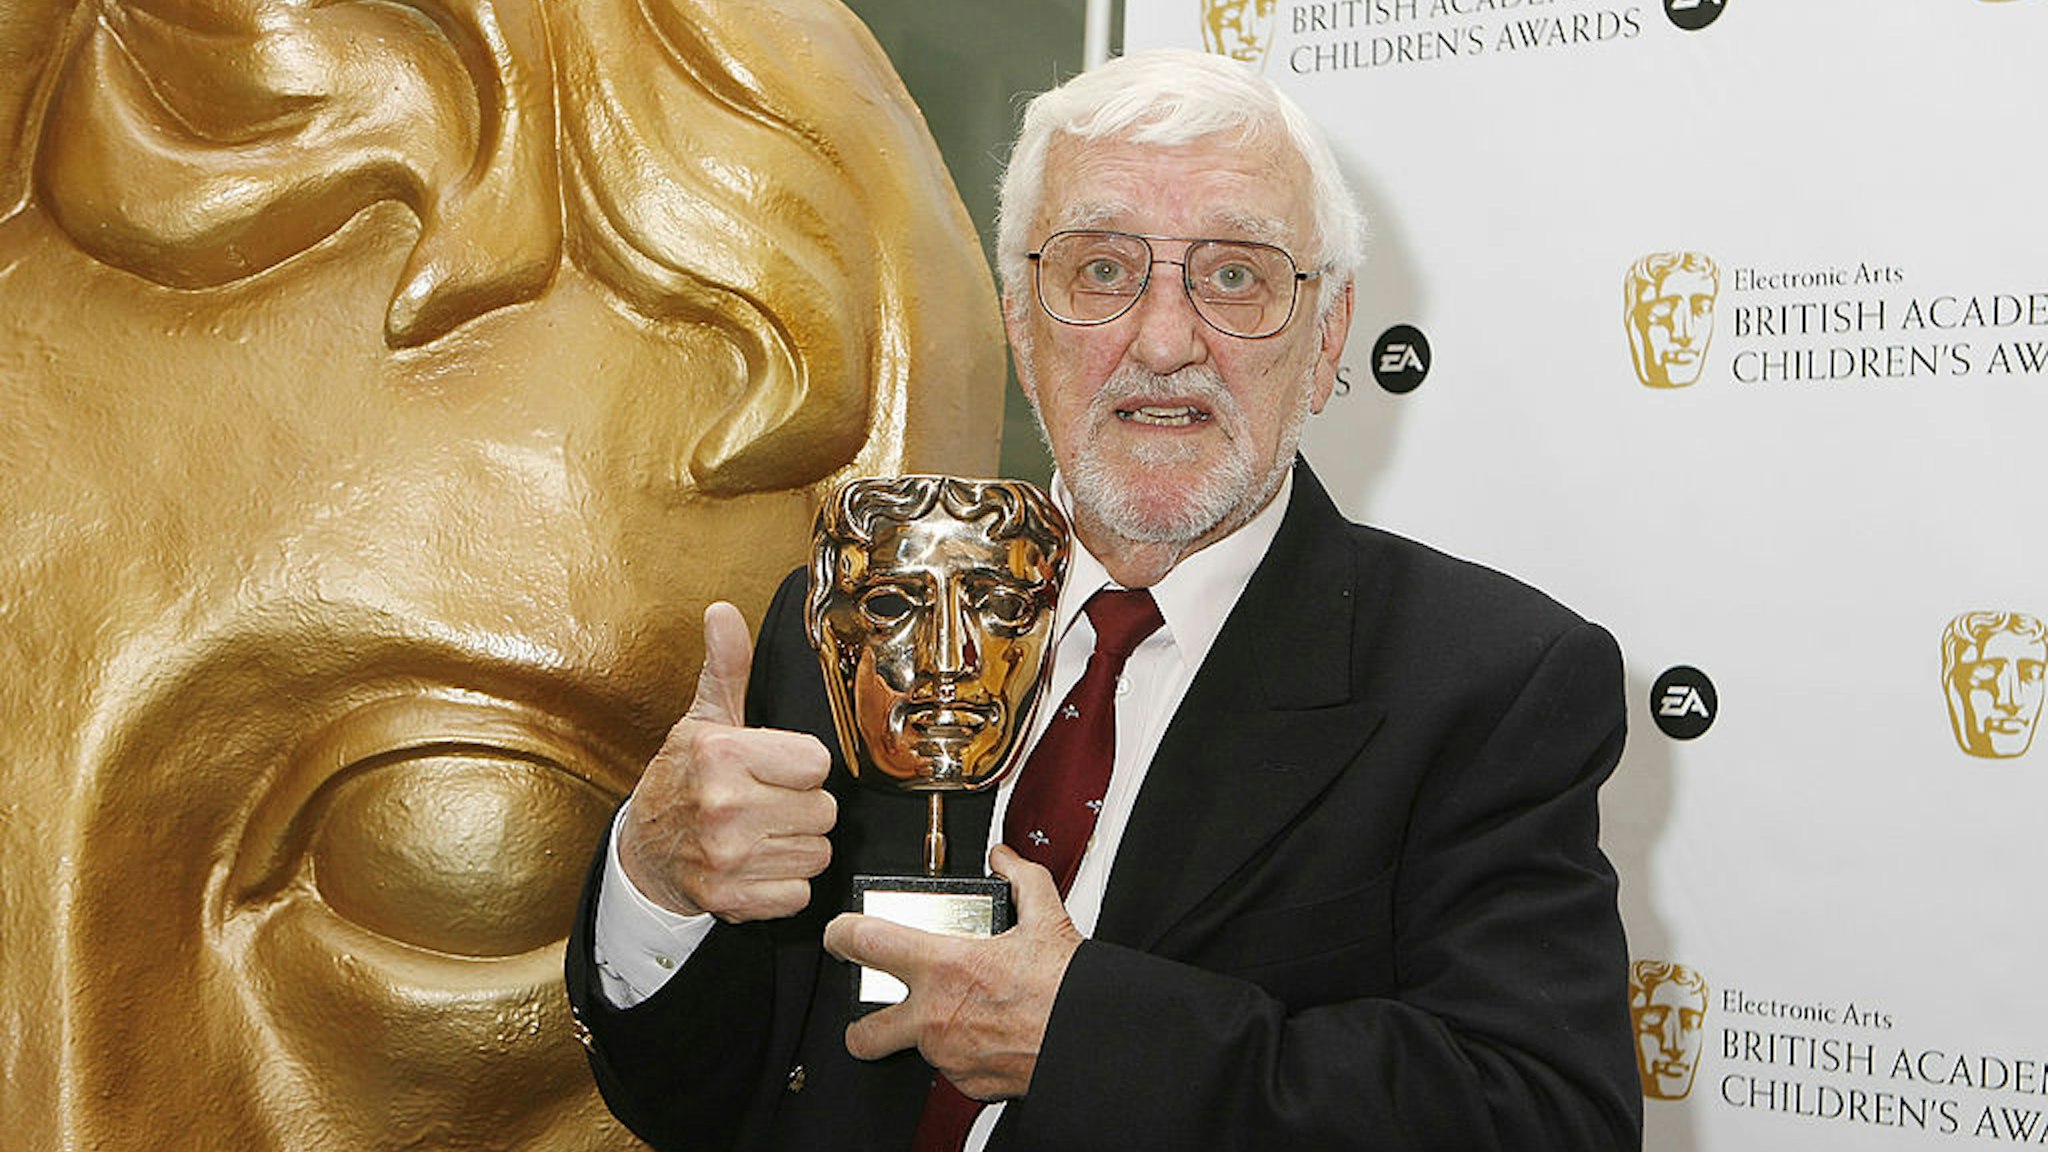 Bernard Cribbins with the Special Award poses in the press room at the 'EA British Academy Children's Awards 2009' at The London Hilton on November 29, 2009 in London, England.